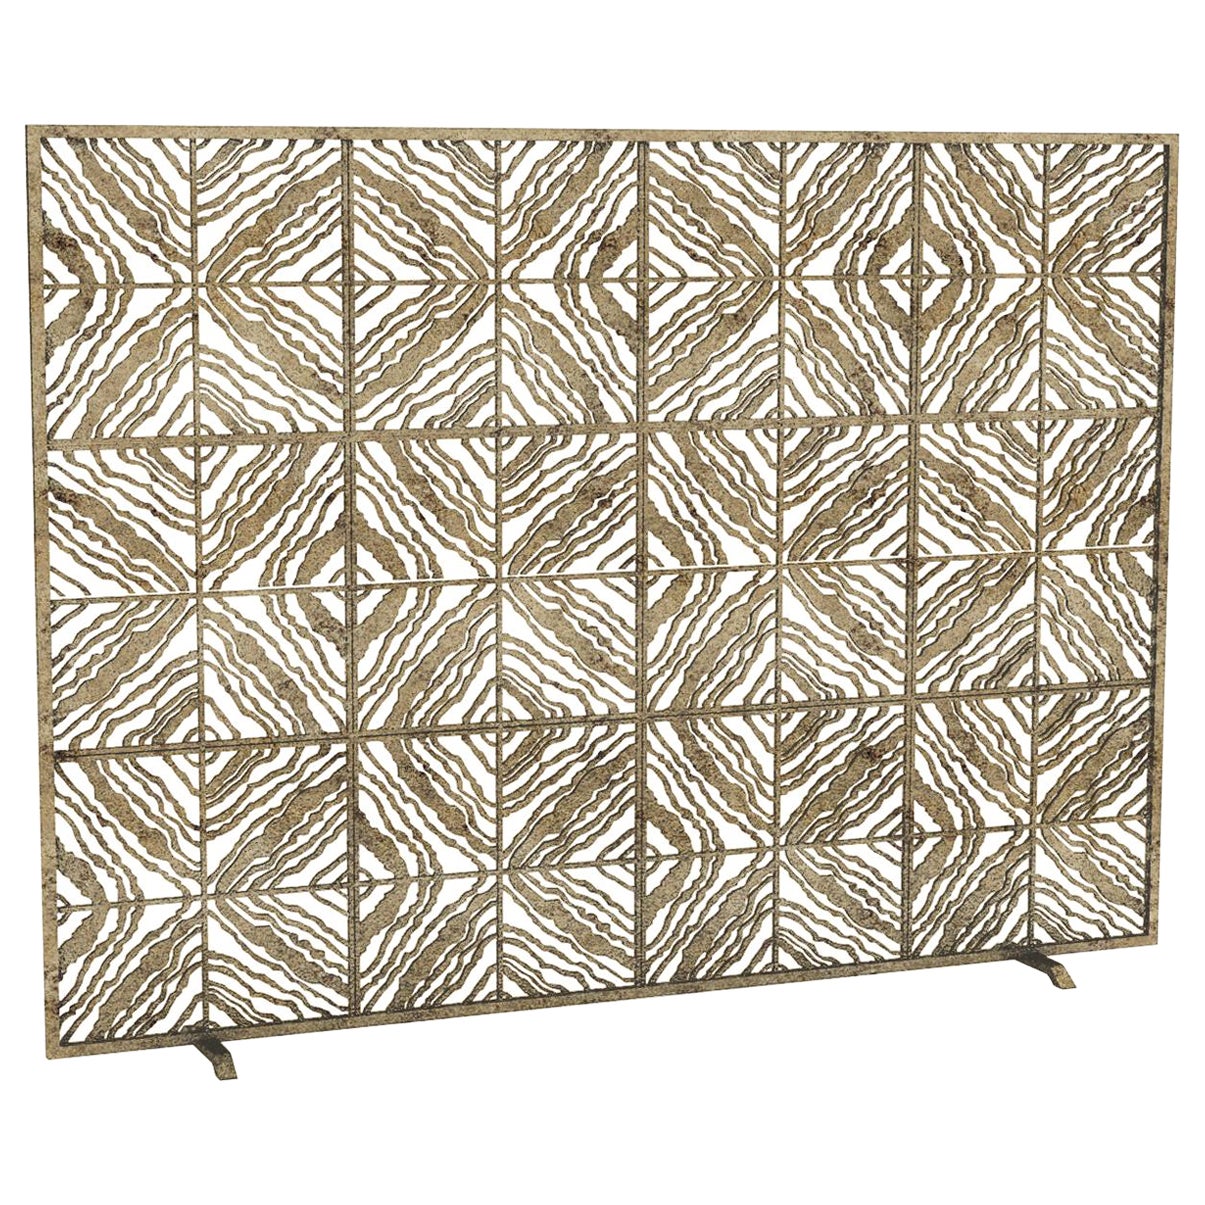 Tapestry Fireplace Screen in a Hand Painted Aged Silver Finish